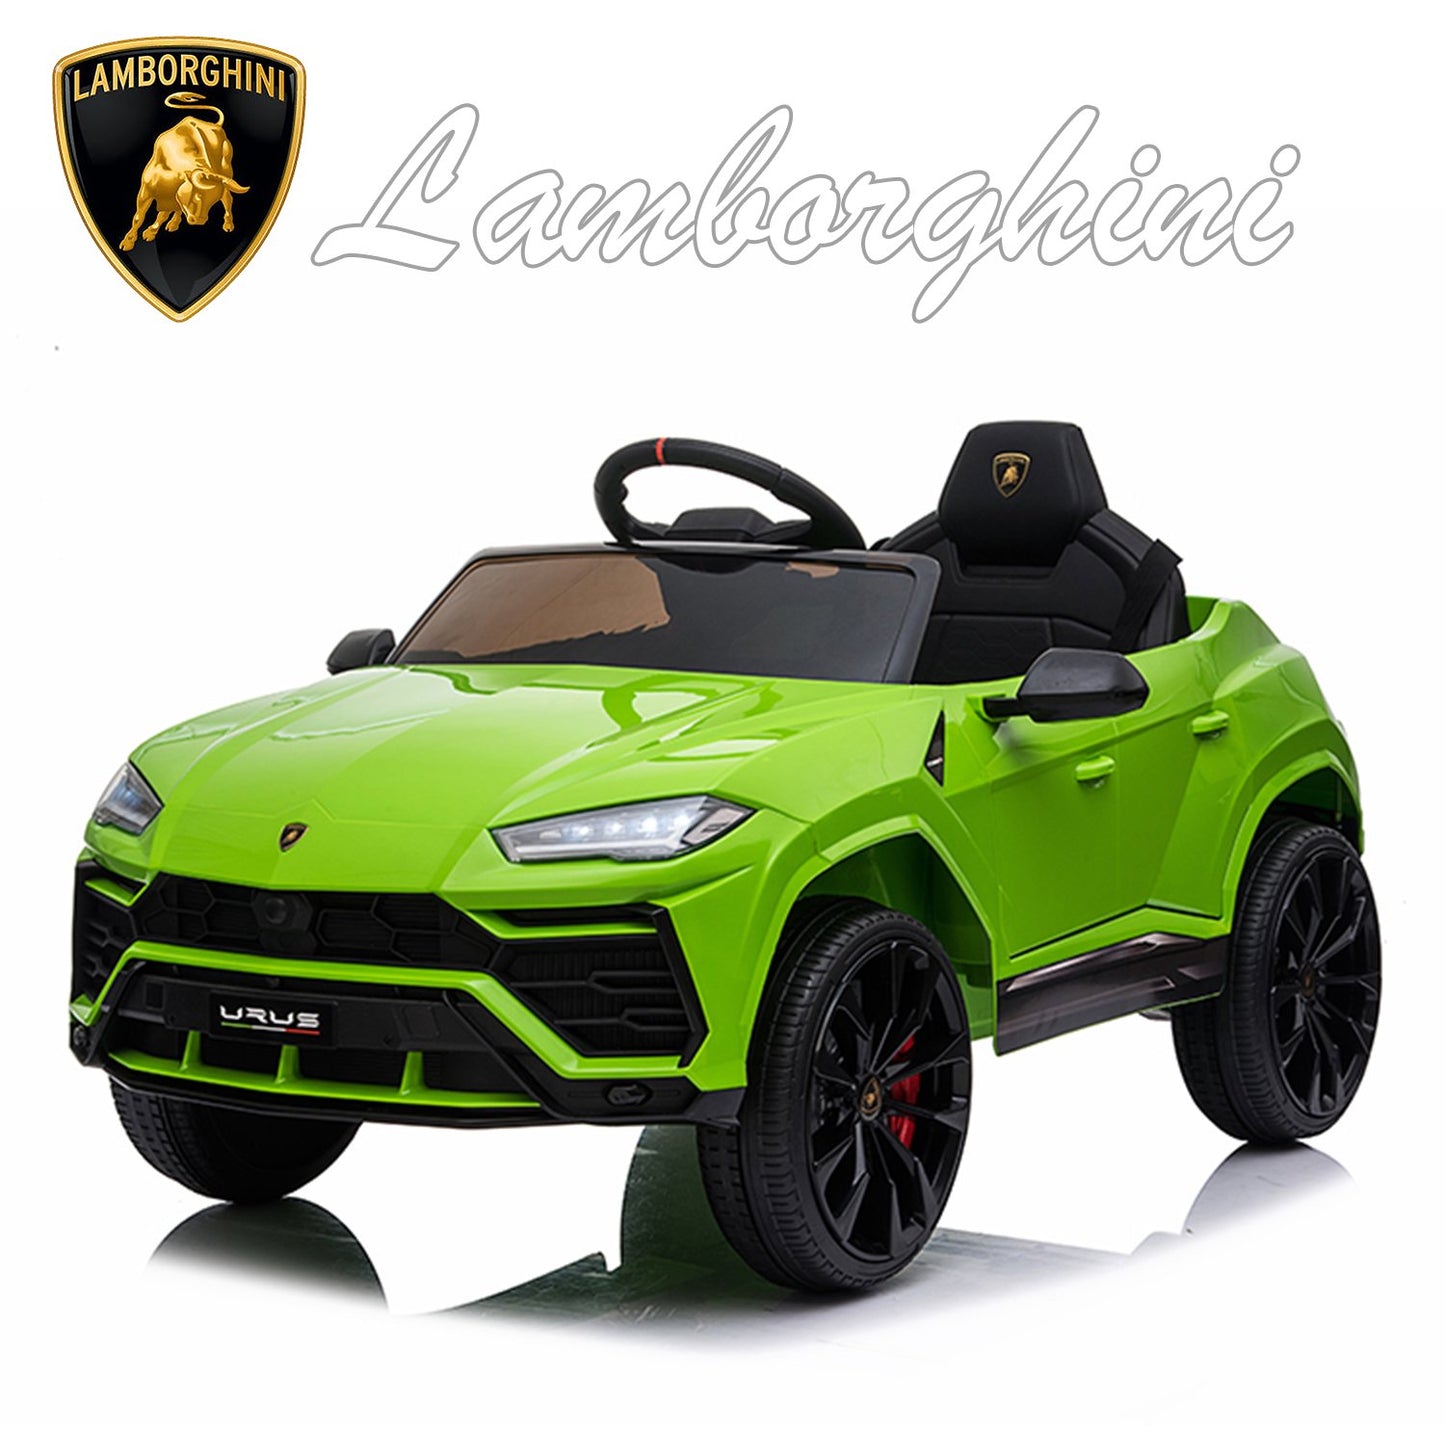 SYNGAR Green 12V Lamborghini Powered Ride on with 2 Control Modes, 3 Speeds, LED Lights and MP3 Player